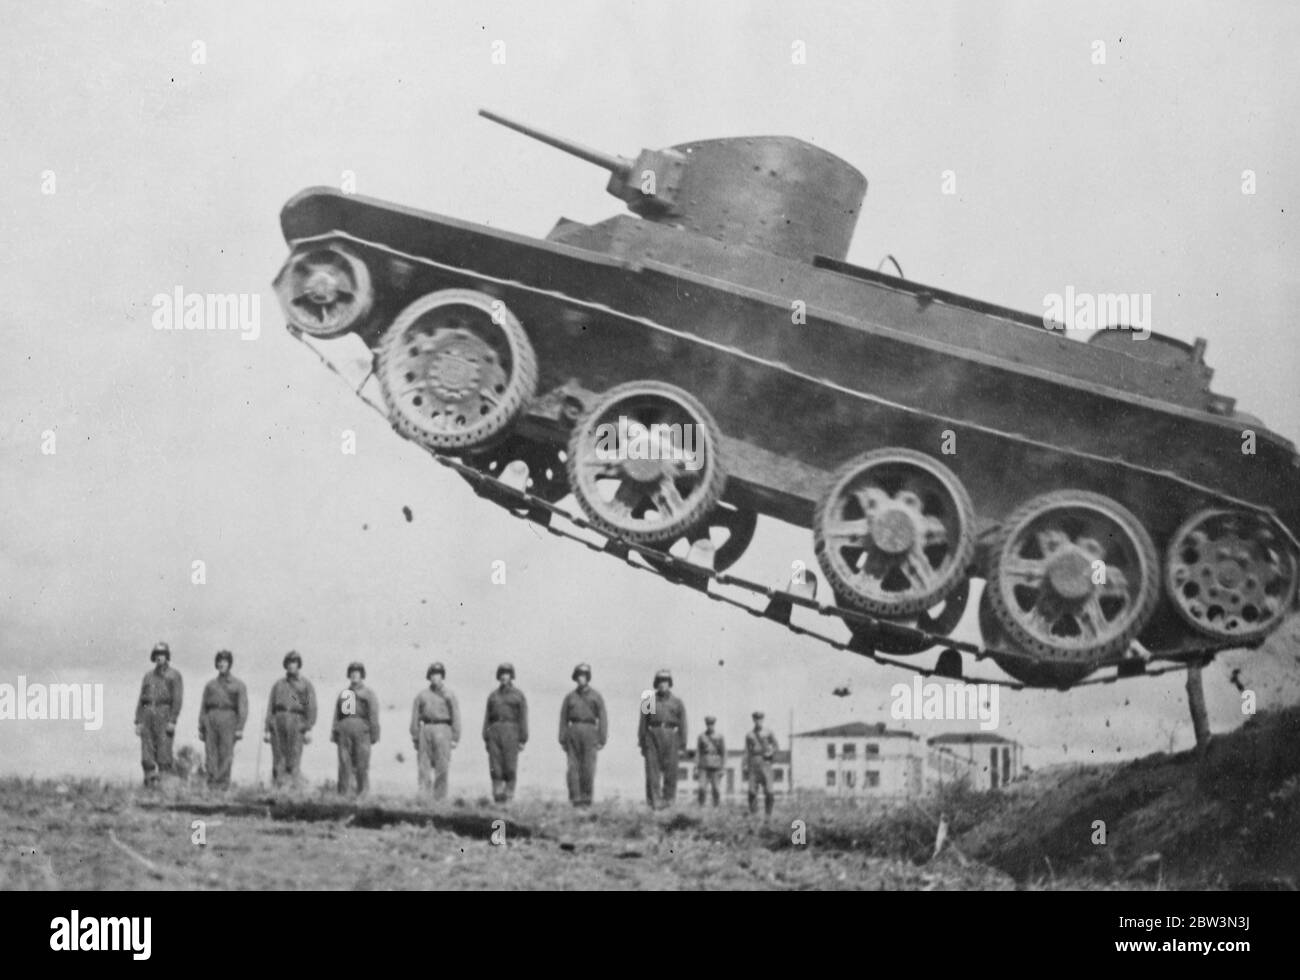 Tanks in flight - Russia 's steel giants in daring exercises . A giant tank high in the air after crashing over an obstacle . 24 October 1935 Stock Photo